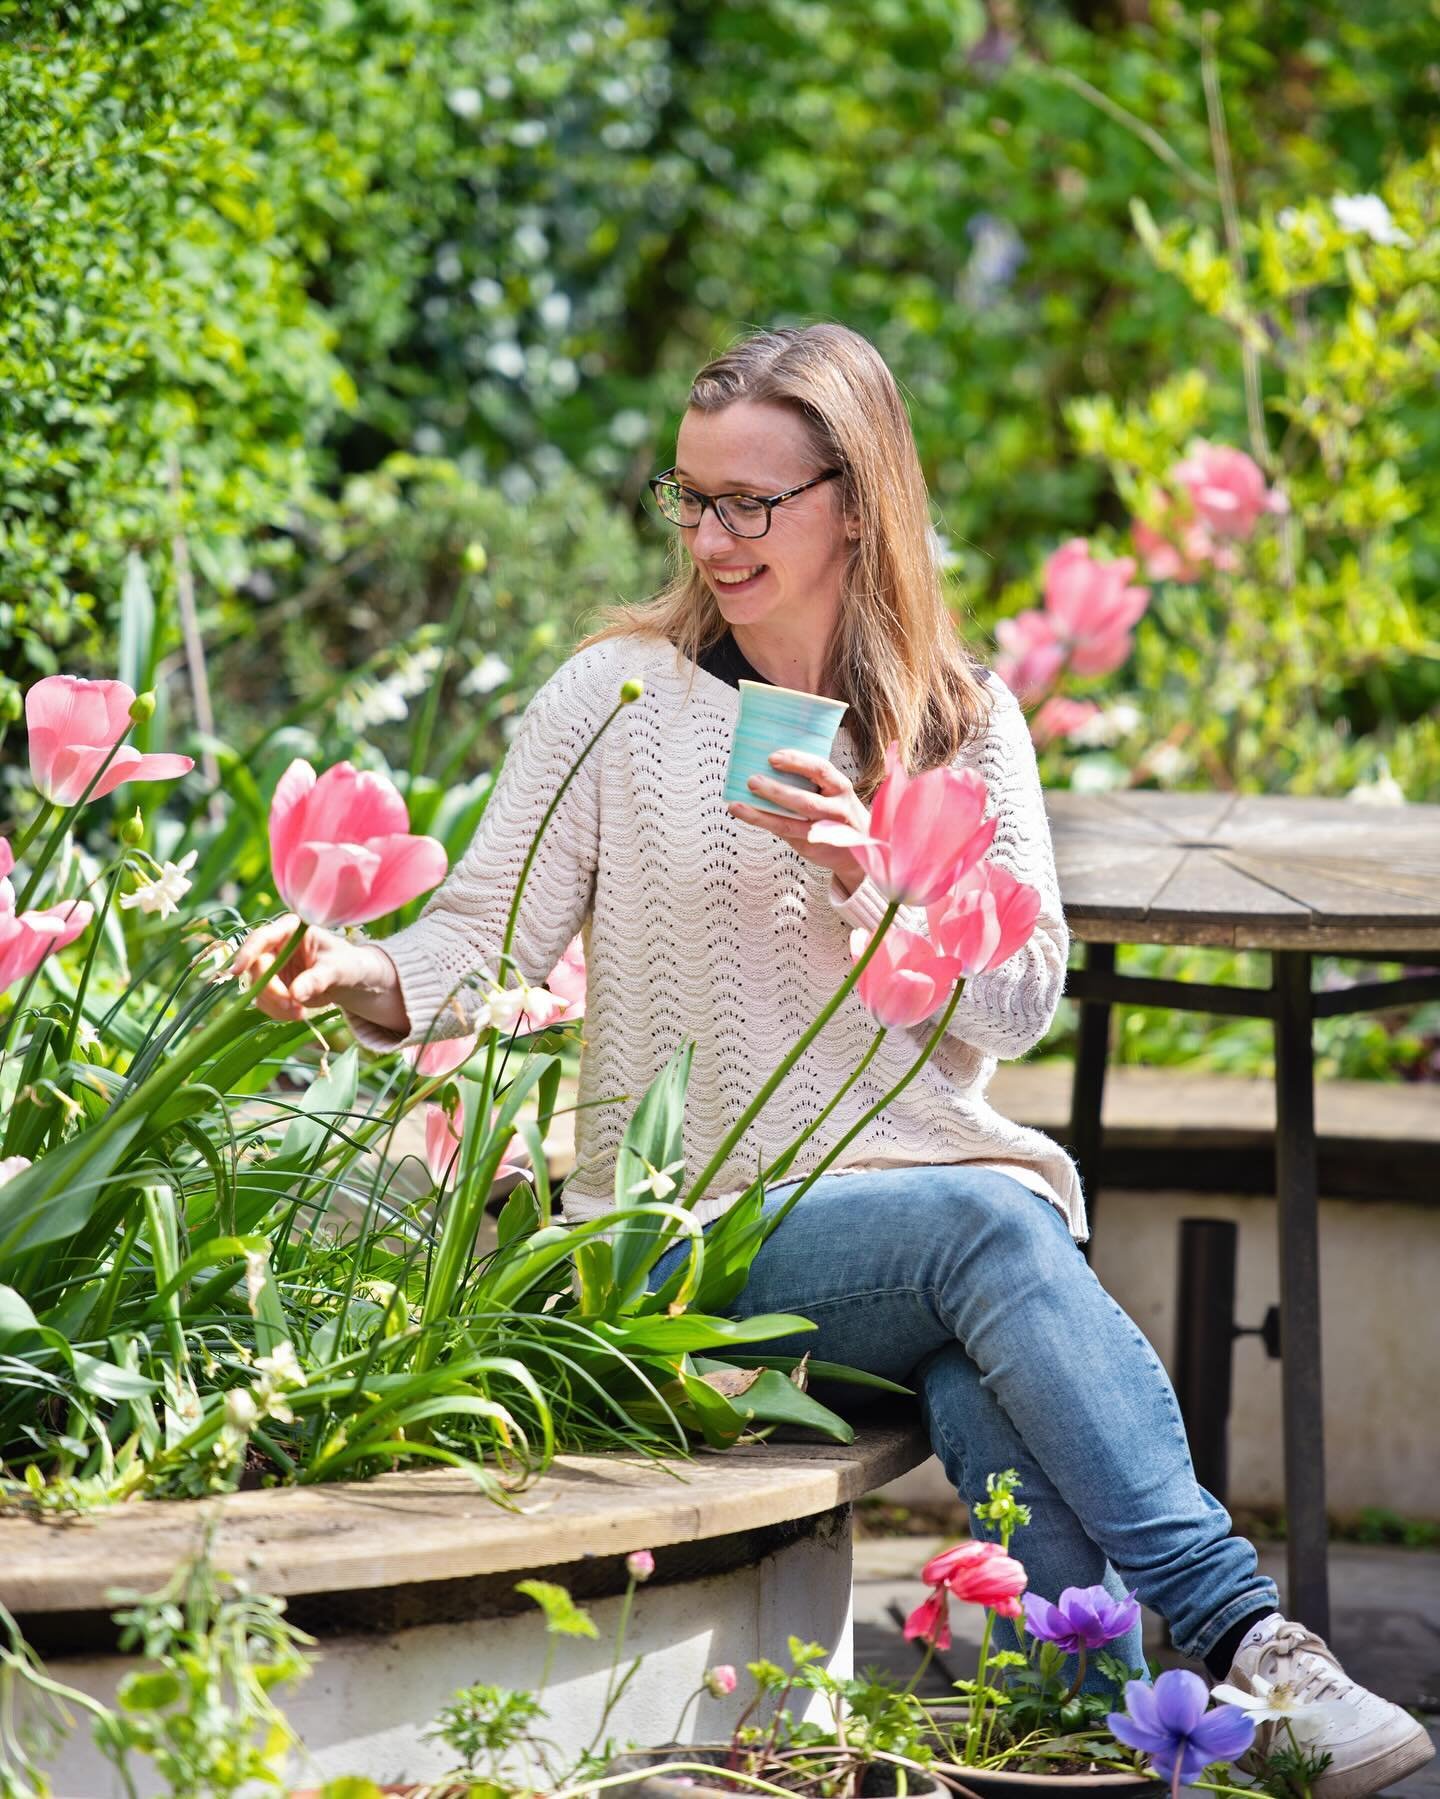 A re-introduction:

I&rsquo;ve just had some updated maker shots of me as I feel like I look different now with these bifocal glasses.

🫖This photo pretty much sums up two of my favourite things: flowers and tea, so if you like both of those we are 